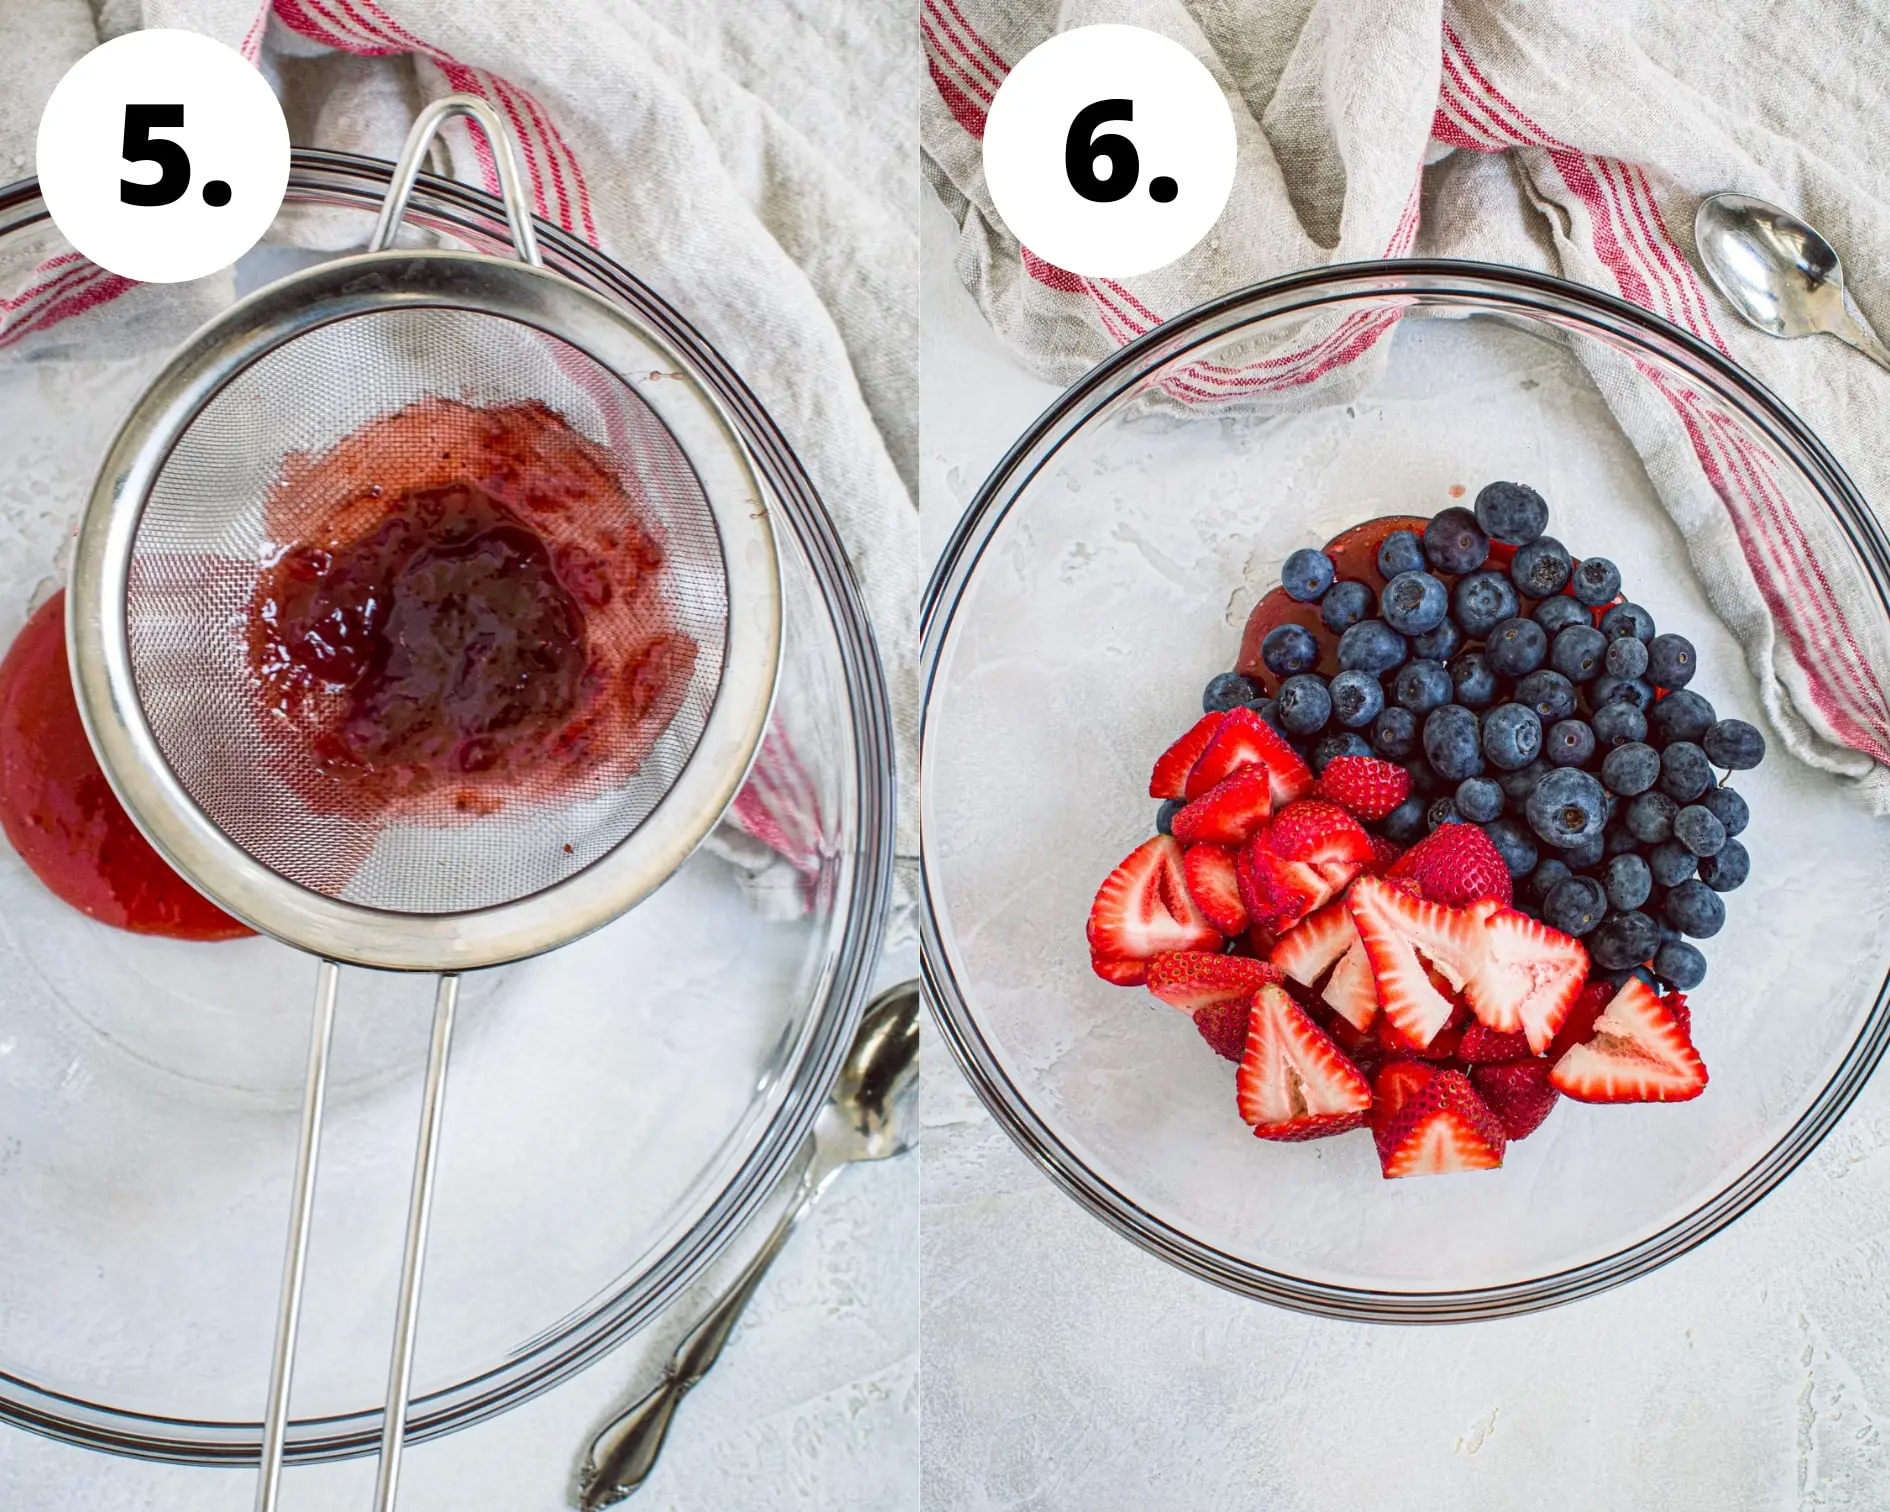 Mixed berry fruit pizza process steps 5 and 6.